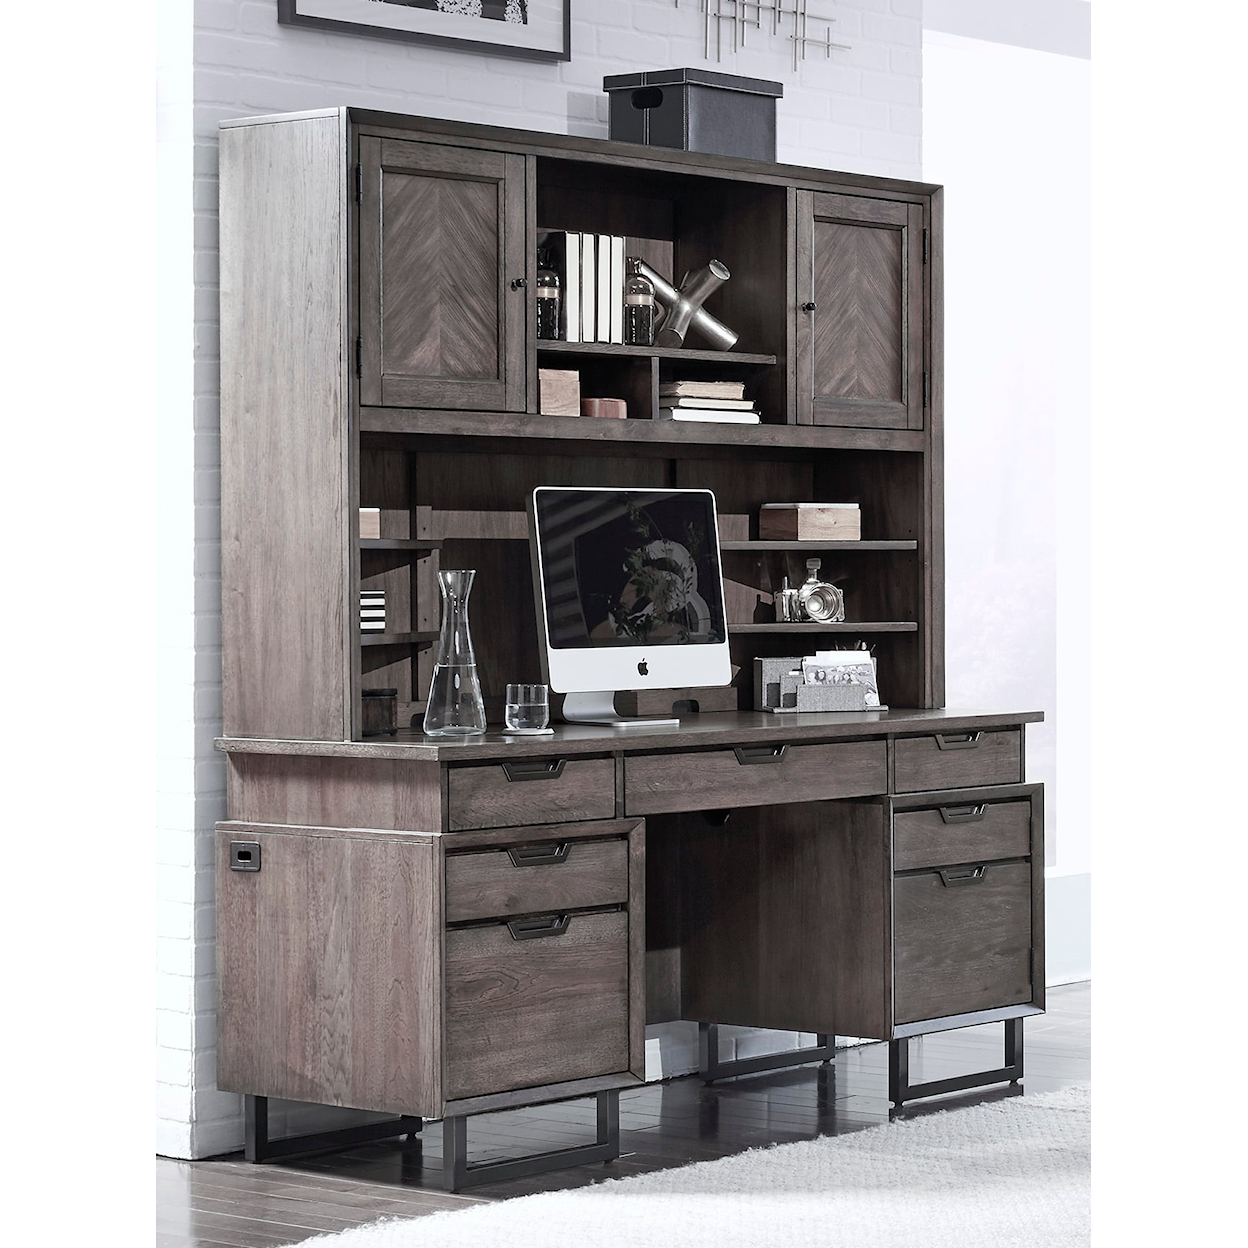 Aspenhome Reyes Desk and Hutch